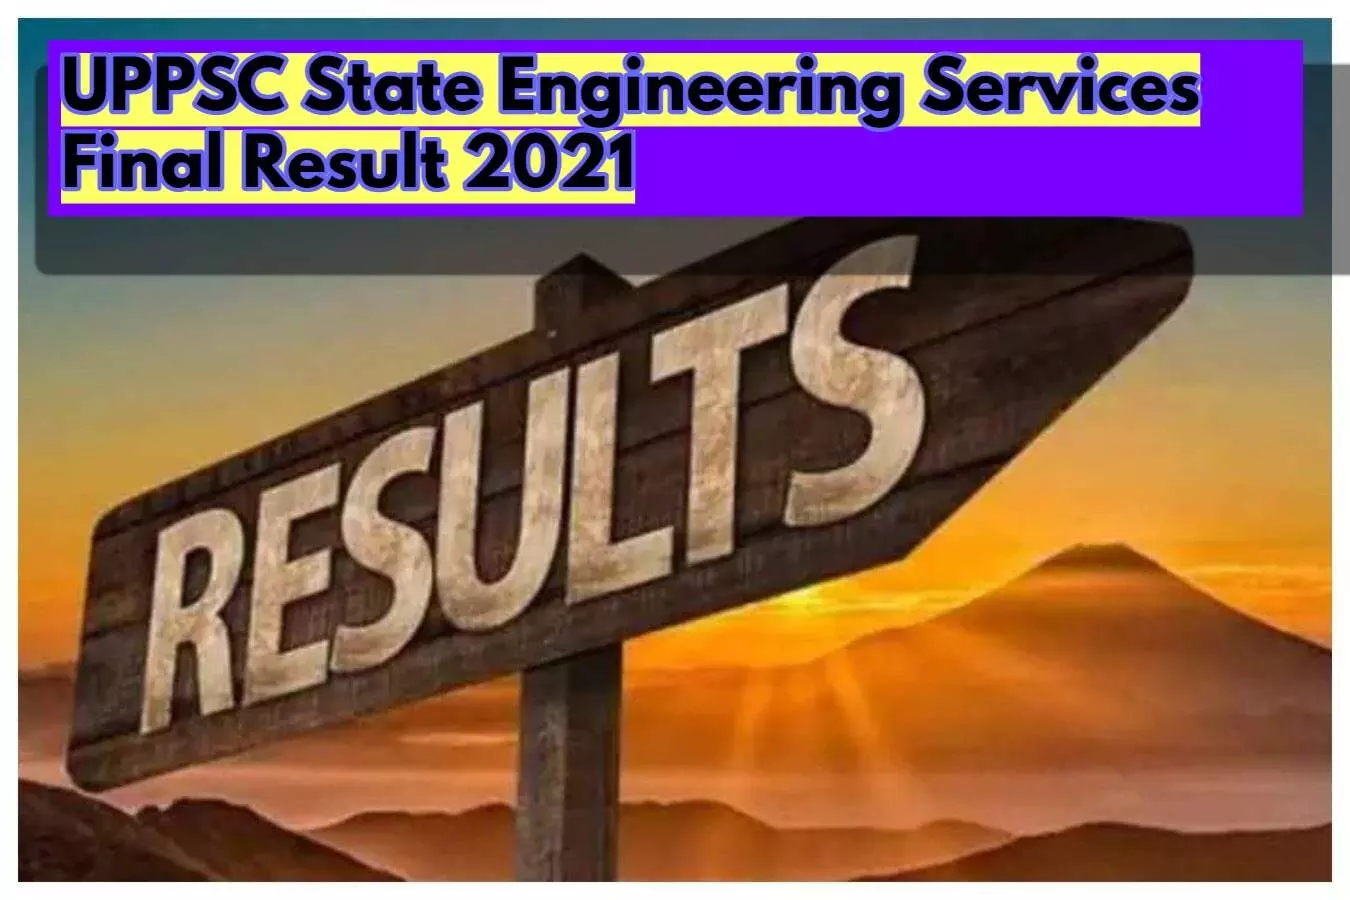 UPPSC State Engineering Services Final Result 2021